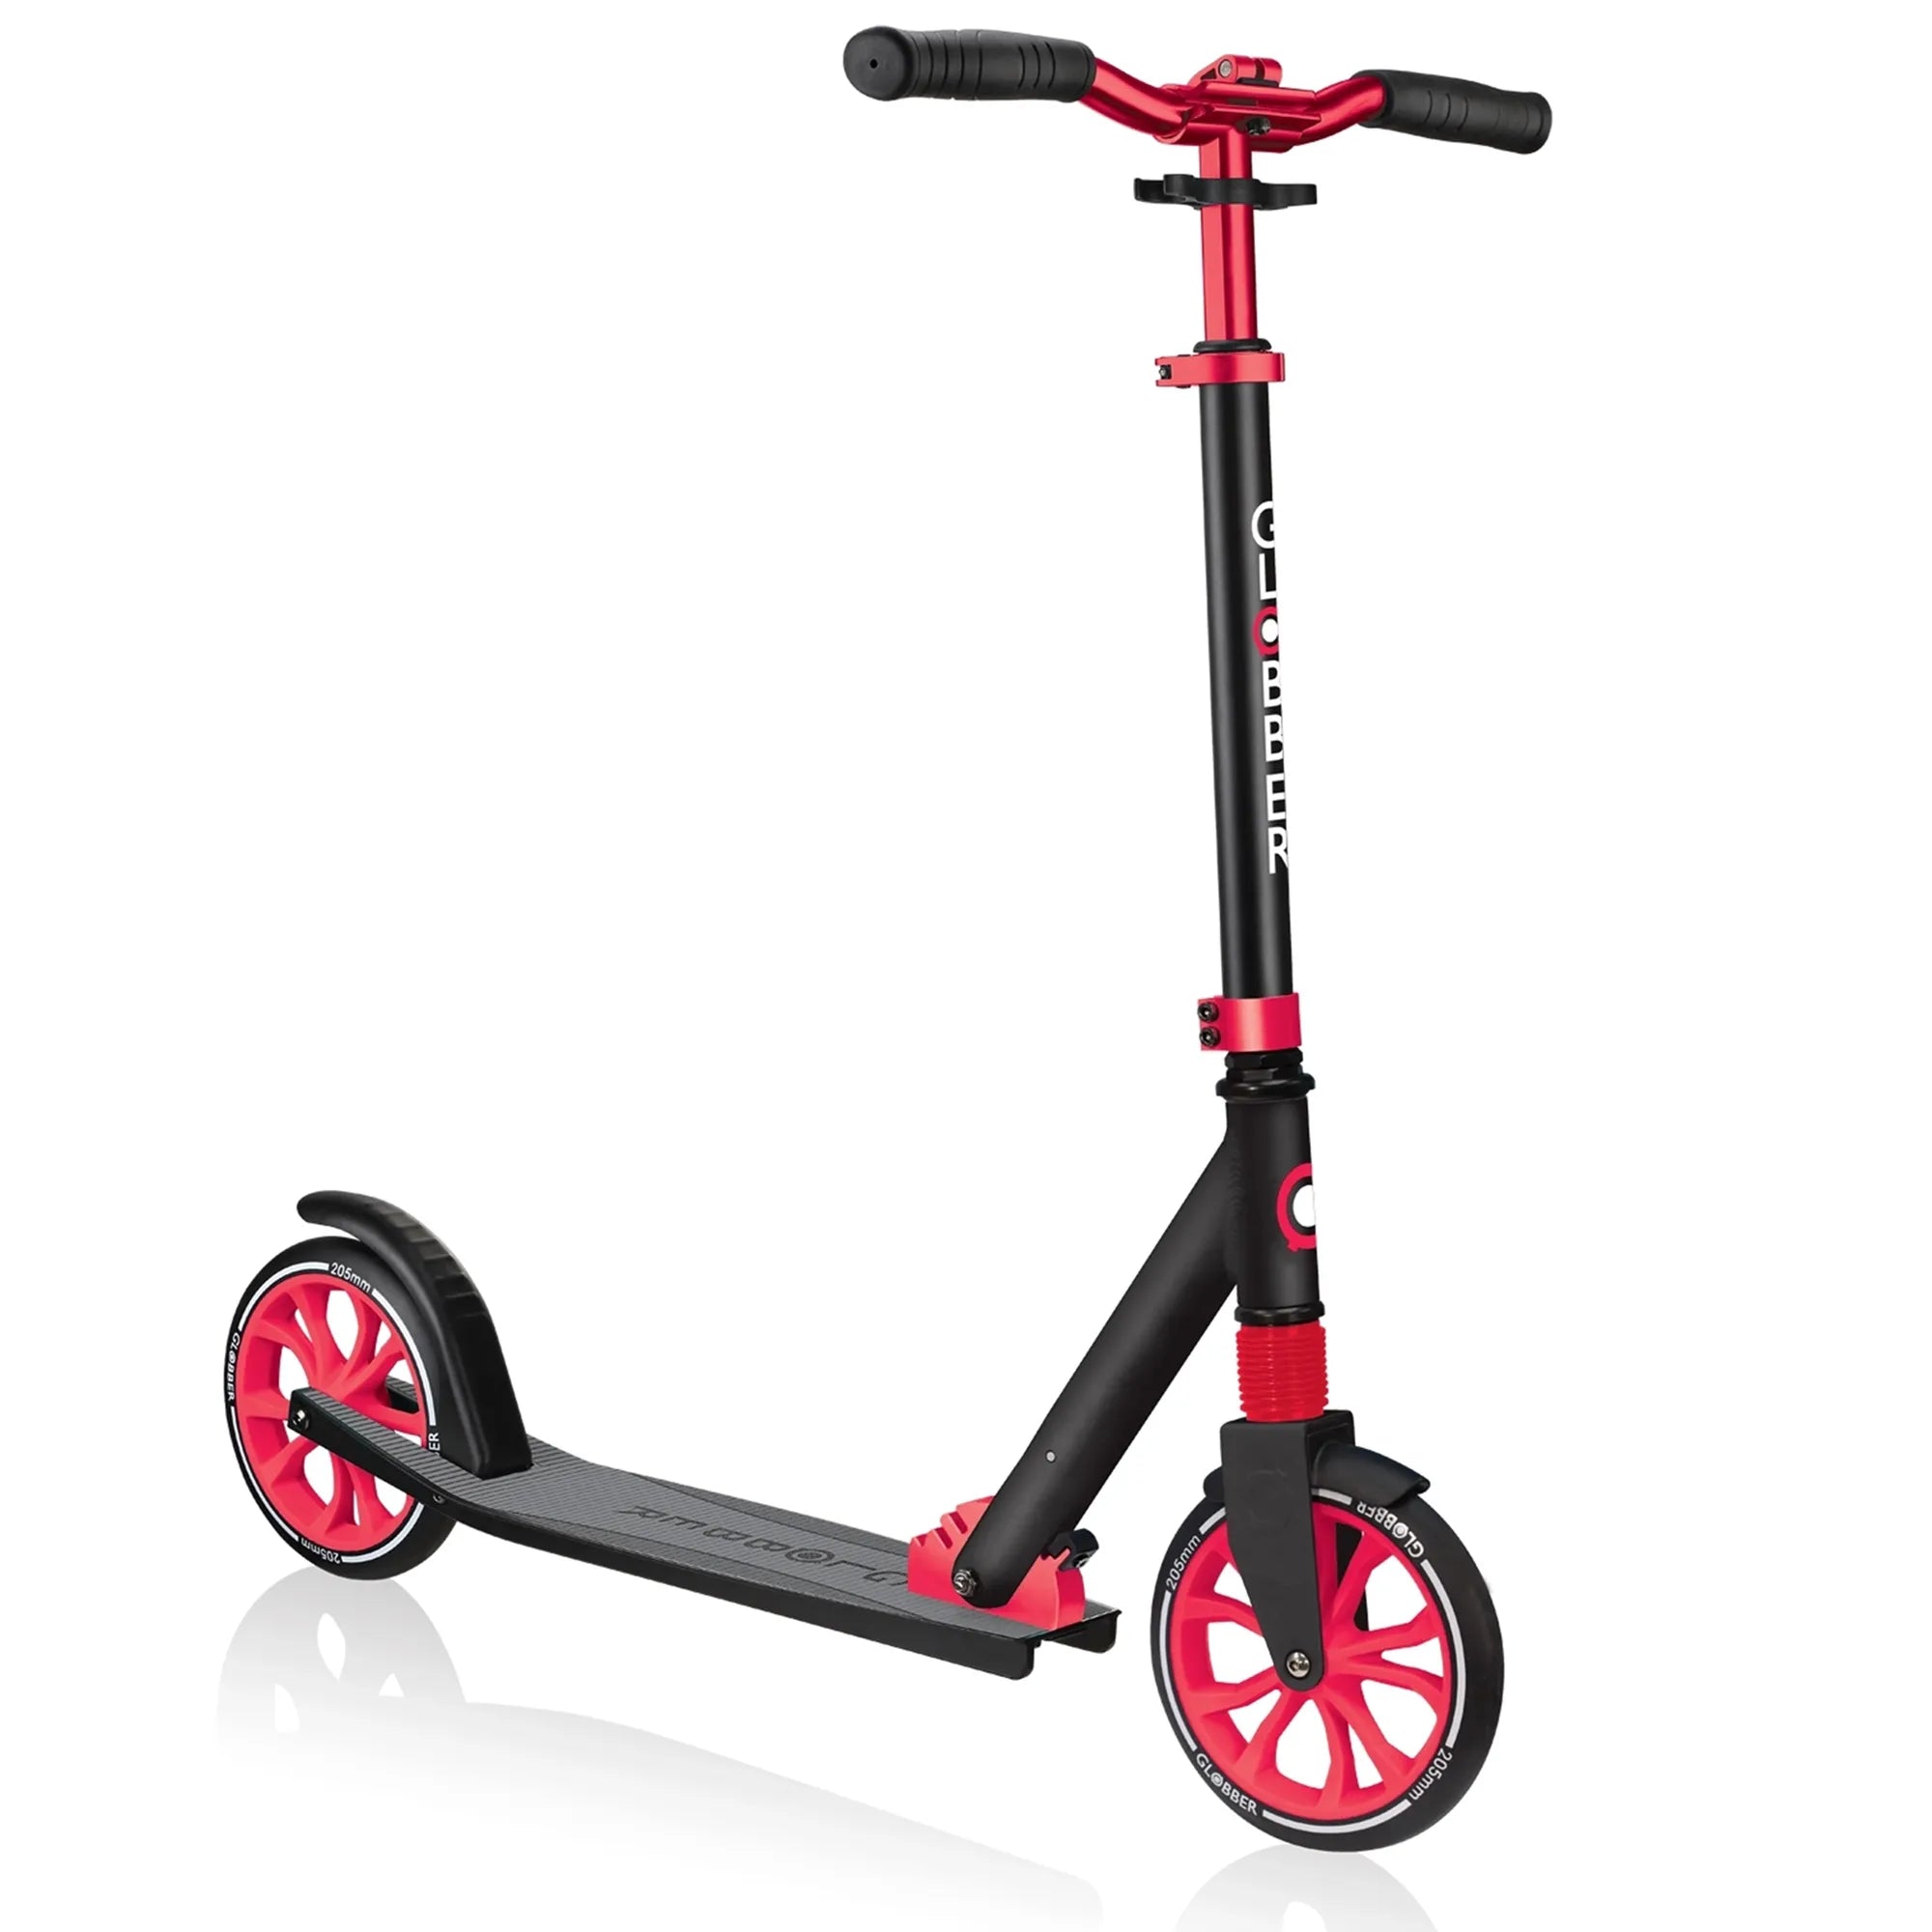 Globber NL 205 - Black & Red - Award-Winning Scooter Ages 8-Adult - Brown's Hobby & Game